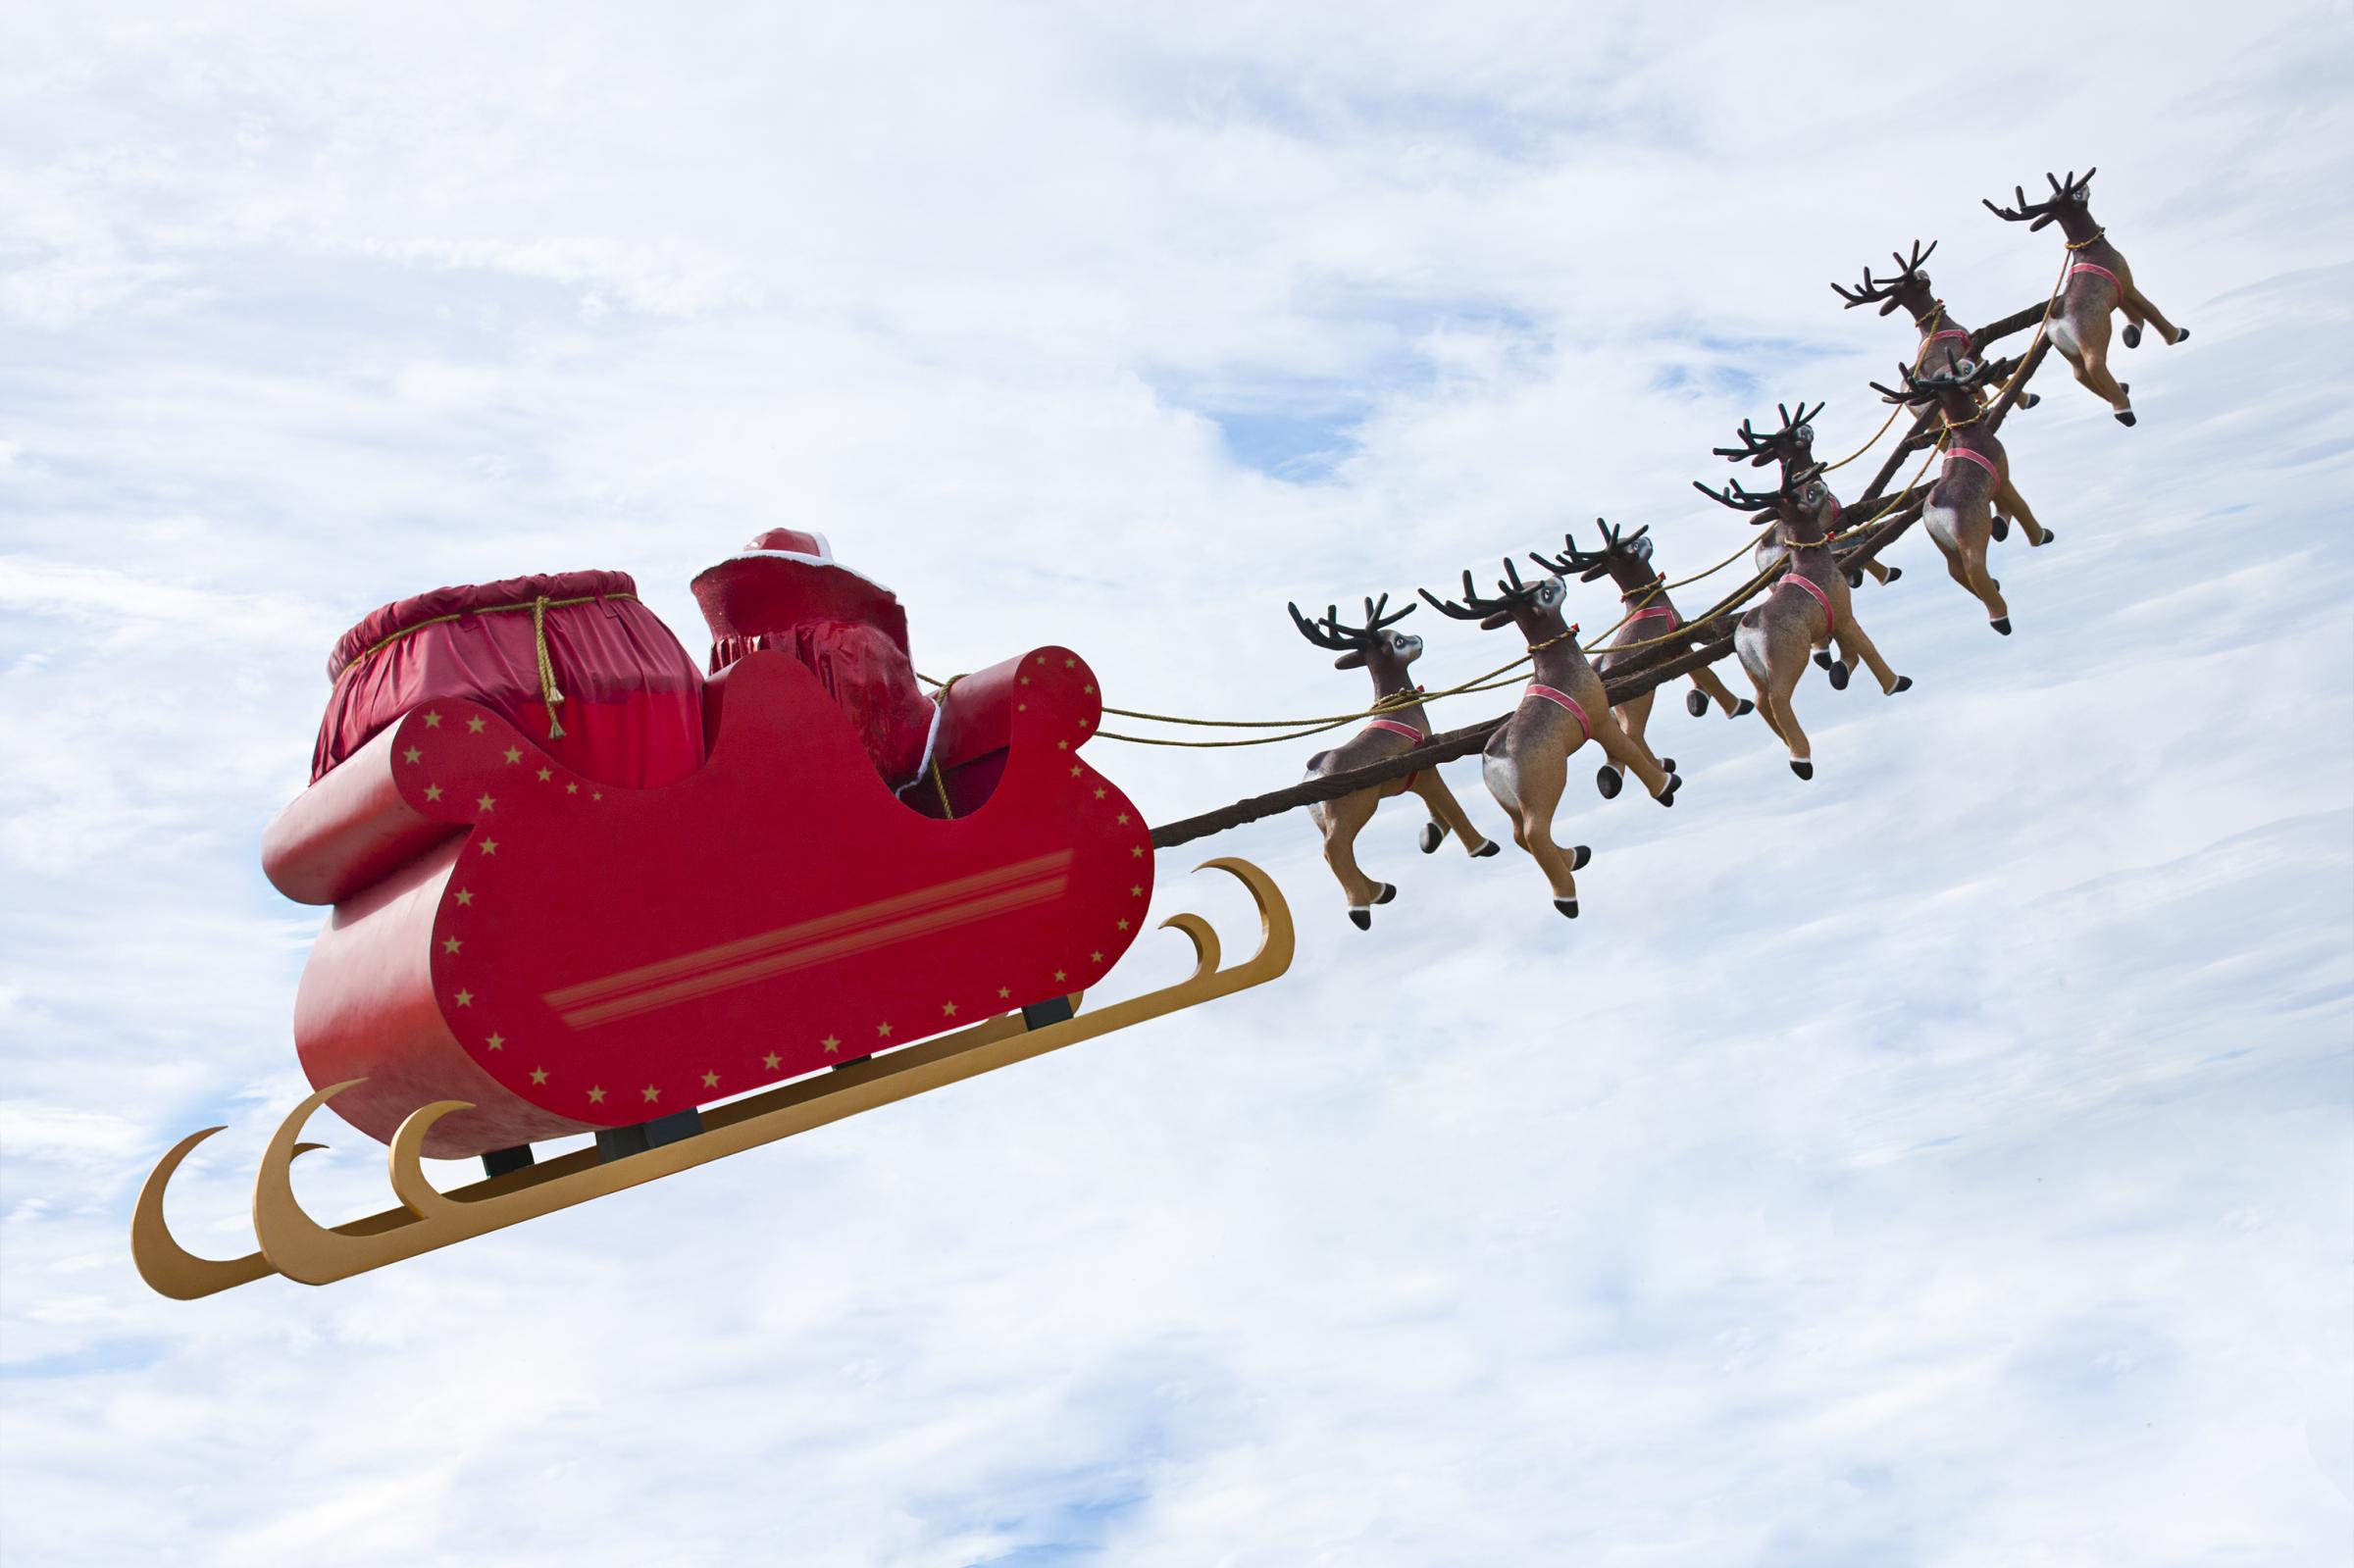 Children due to miss out on Christmas party will be taken on special flight to find Santa instead